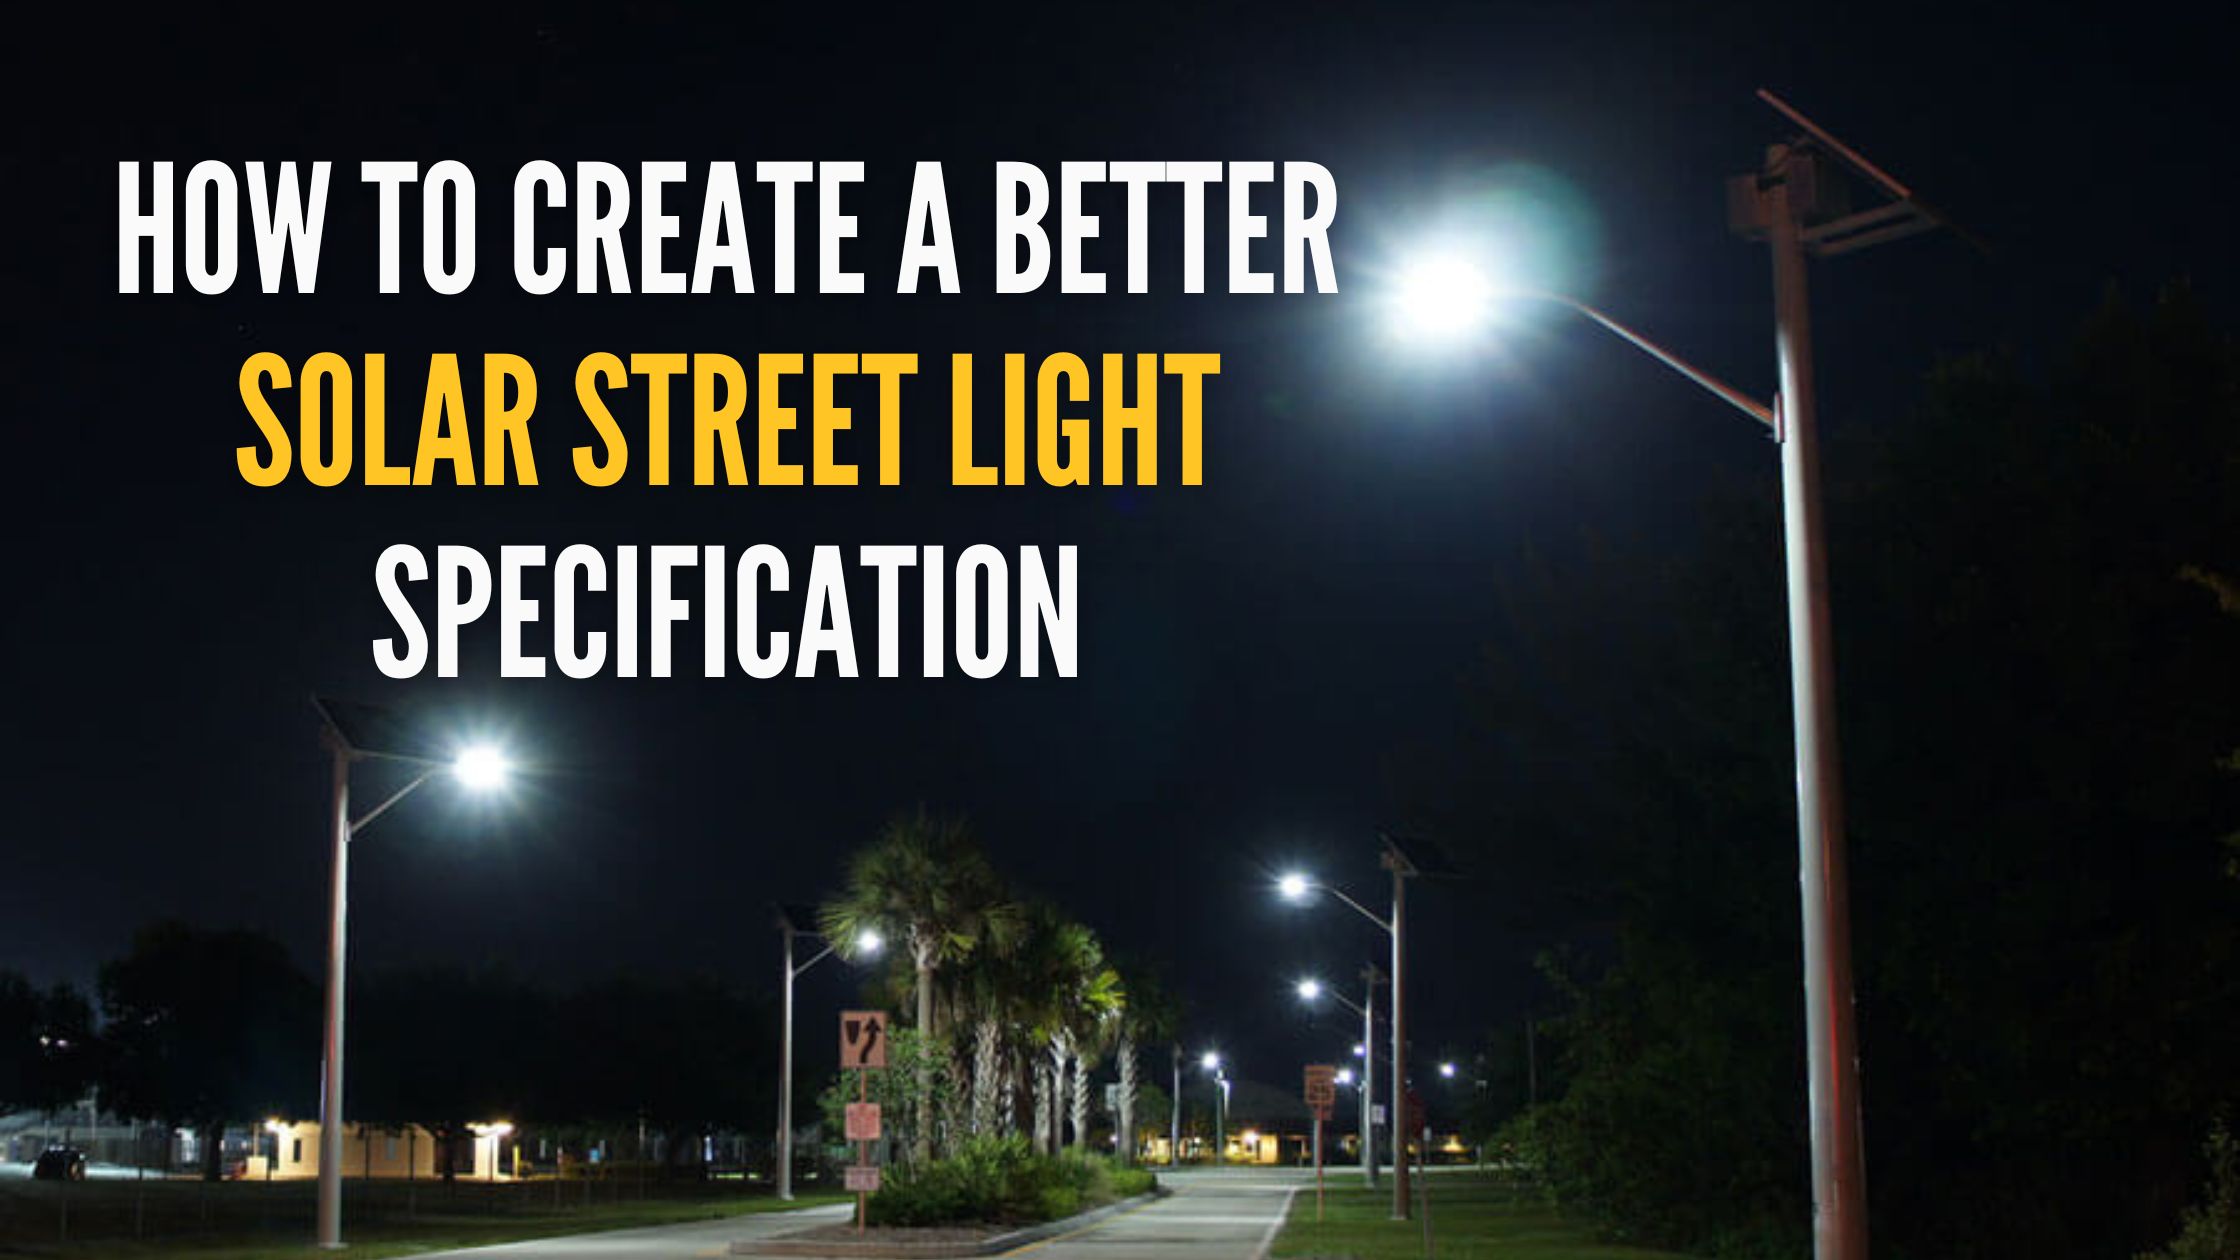 How To Create a Better Solar Street Light Specification